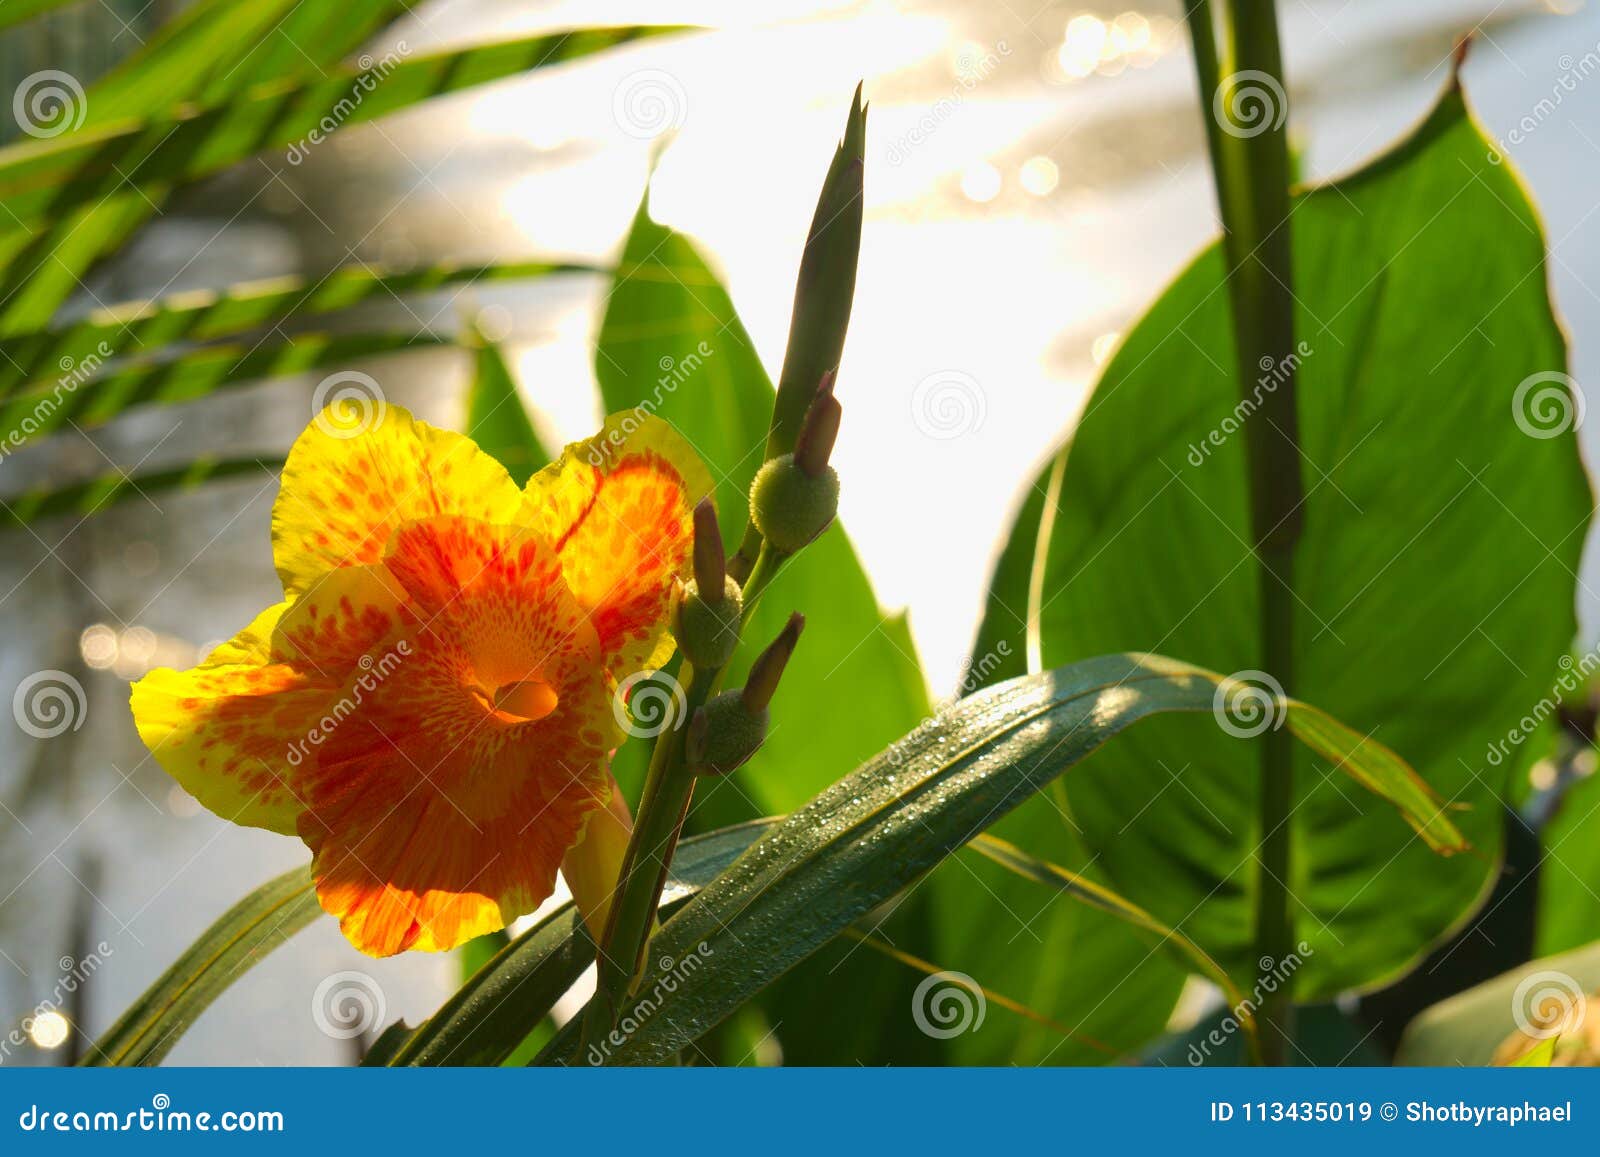 A Fully Bloomed Gorgeous Orange And Yellow Flower Growing On The